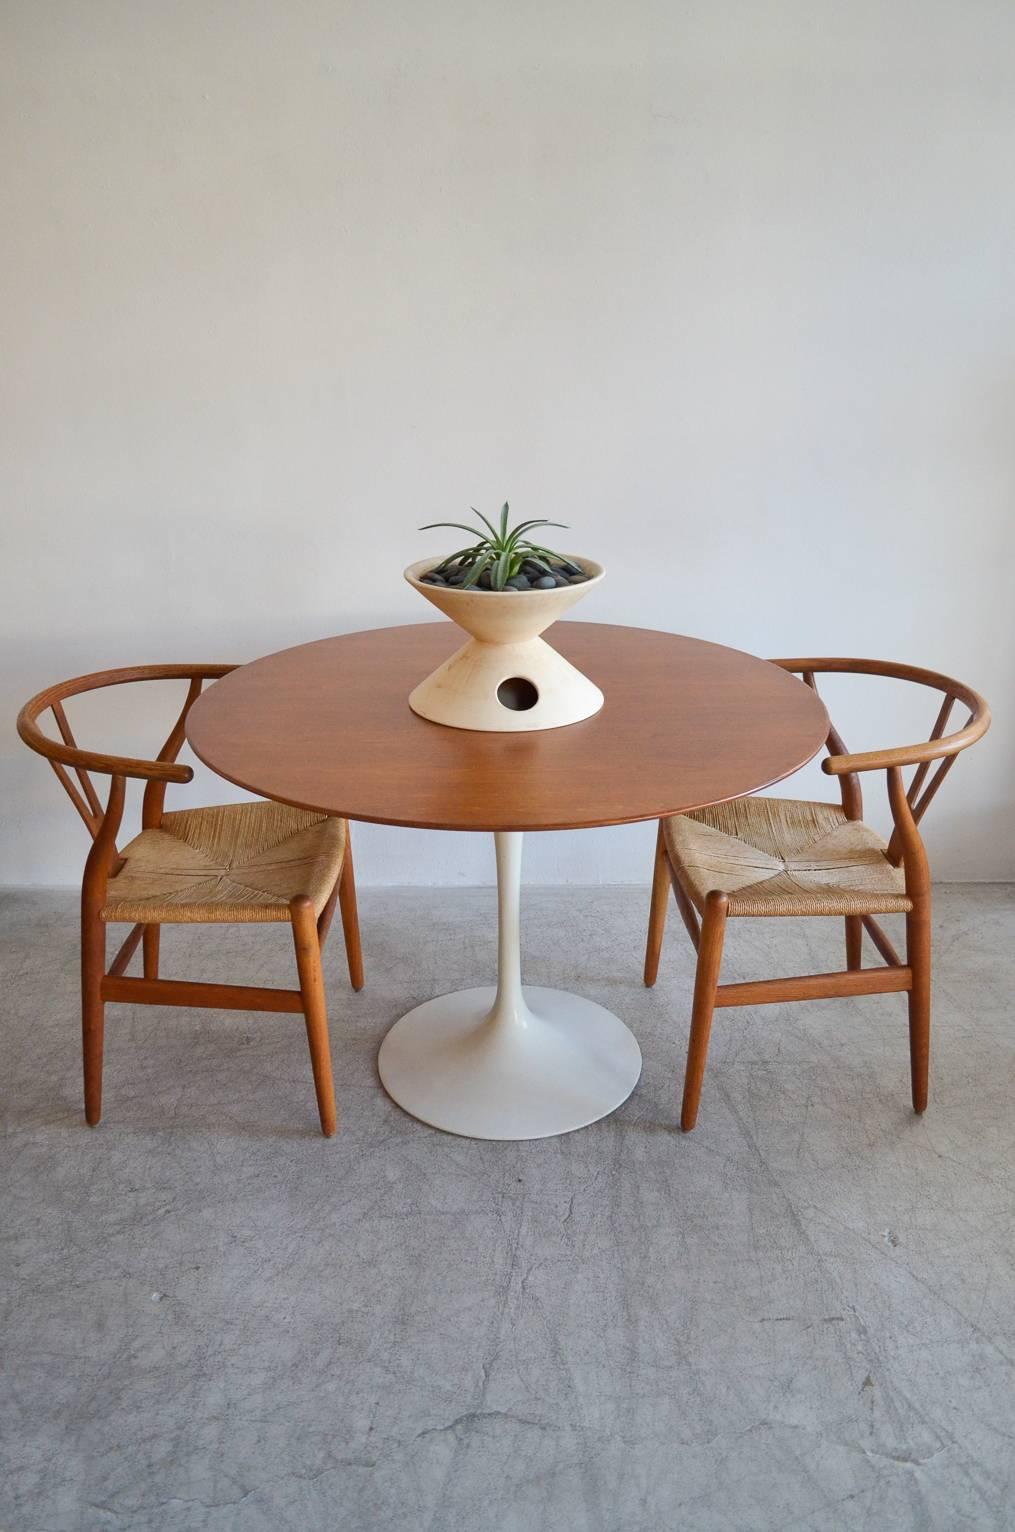 Round Saarinen for Knoll tulip dining table with walnut top. Excellent original vintage condition, base is very good, only light scuffs, no missing paint and walnut top is excellent. Heavy, cast iron base.

Measures: 42